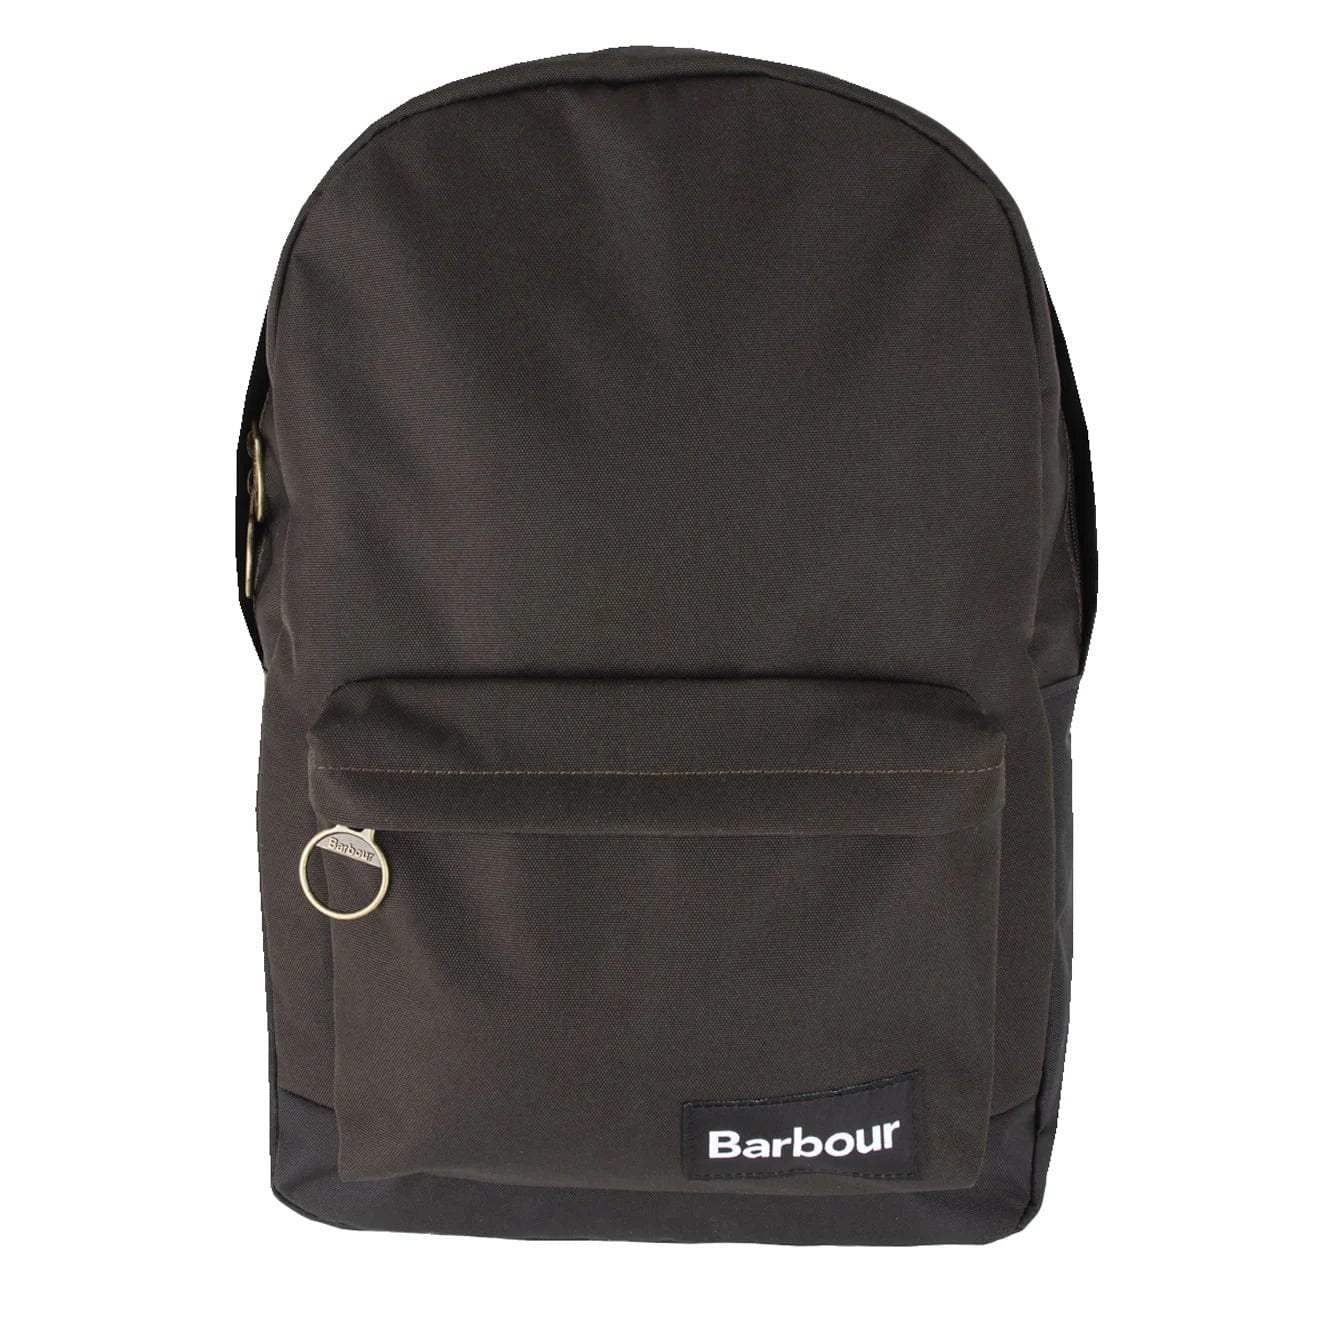 Barbour Highfield Canvas Backpack - The Luxury Promotional Gifts Company Limited